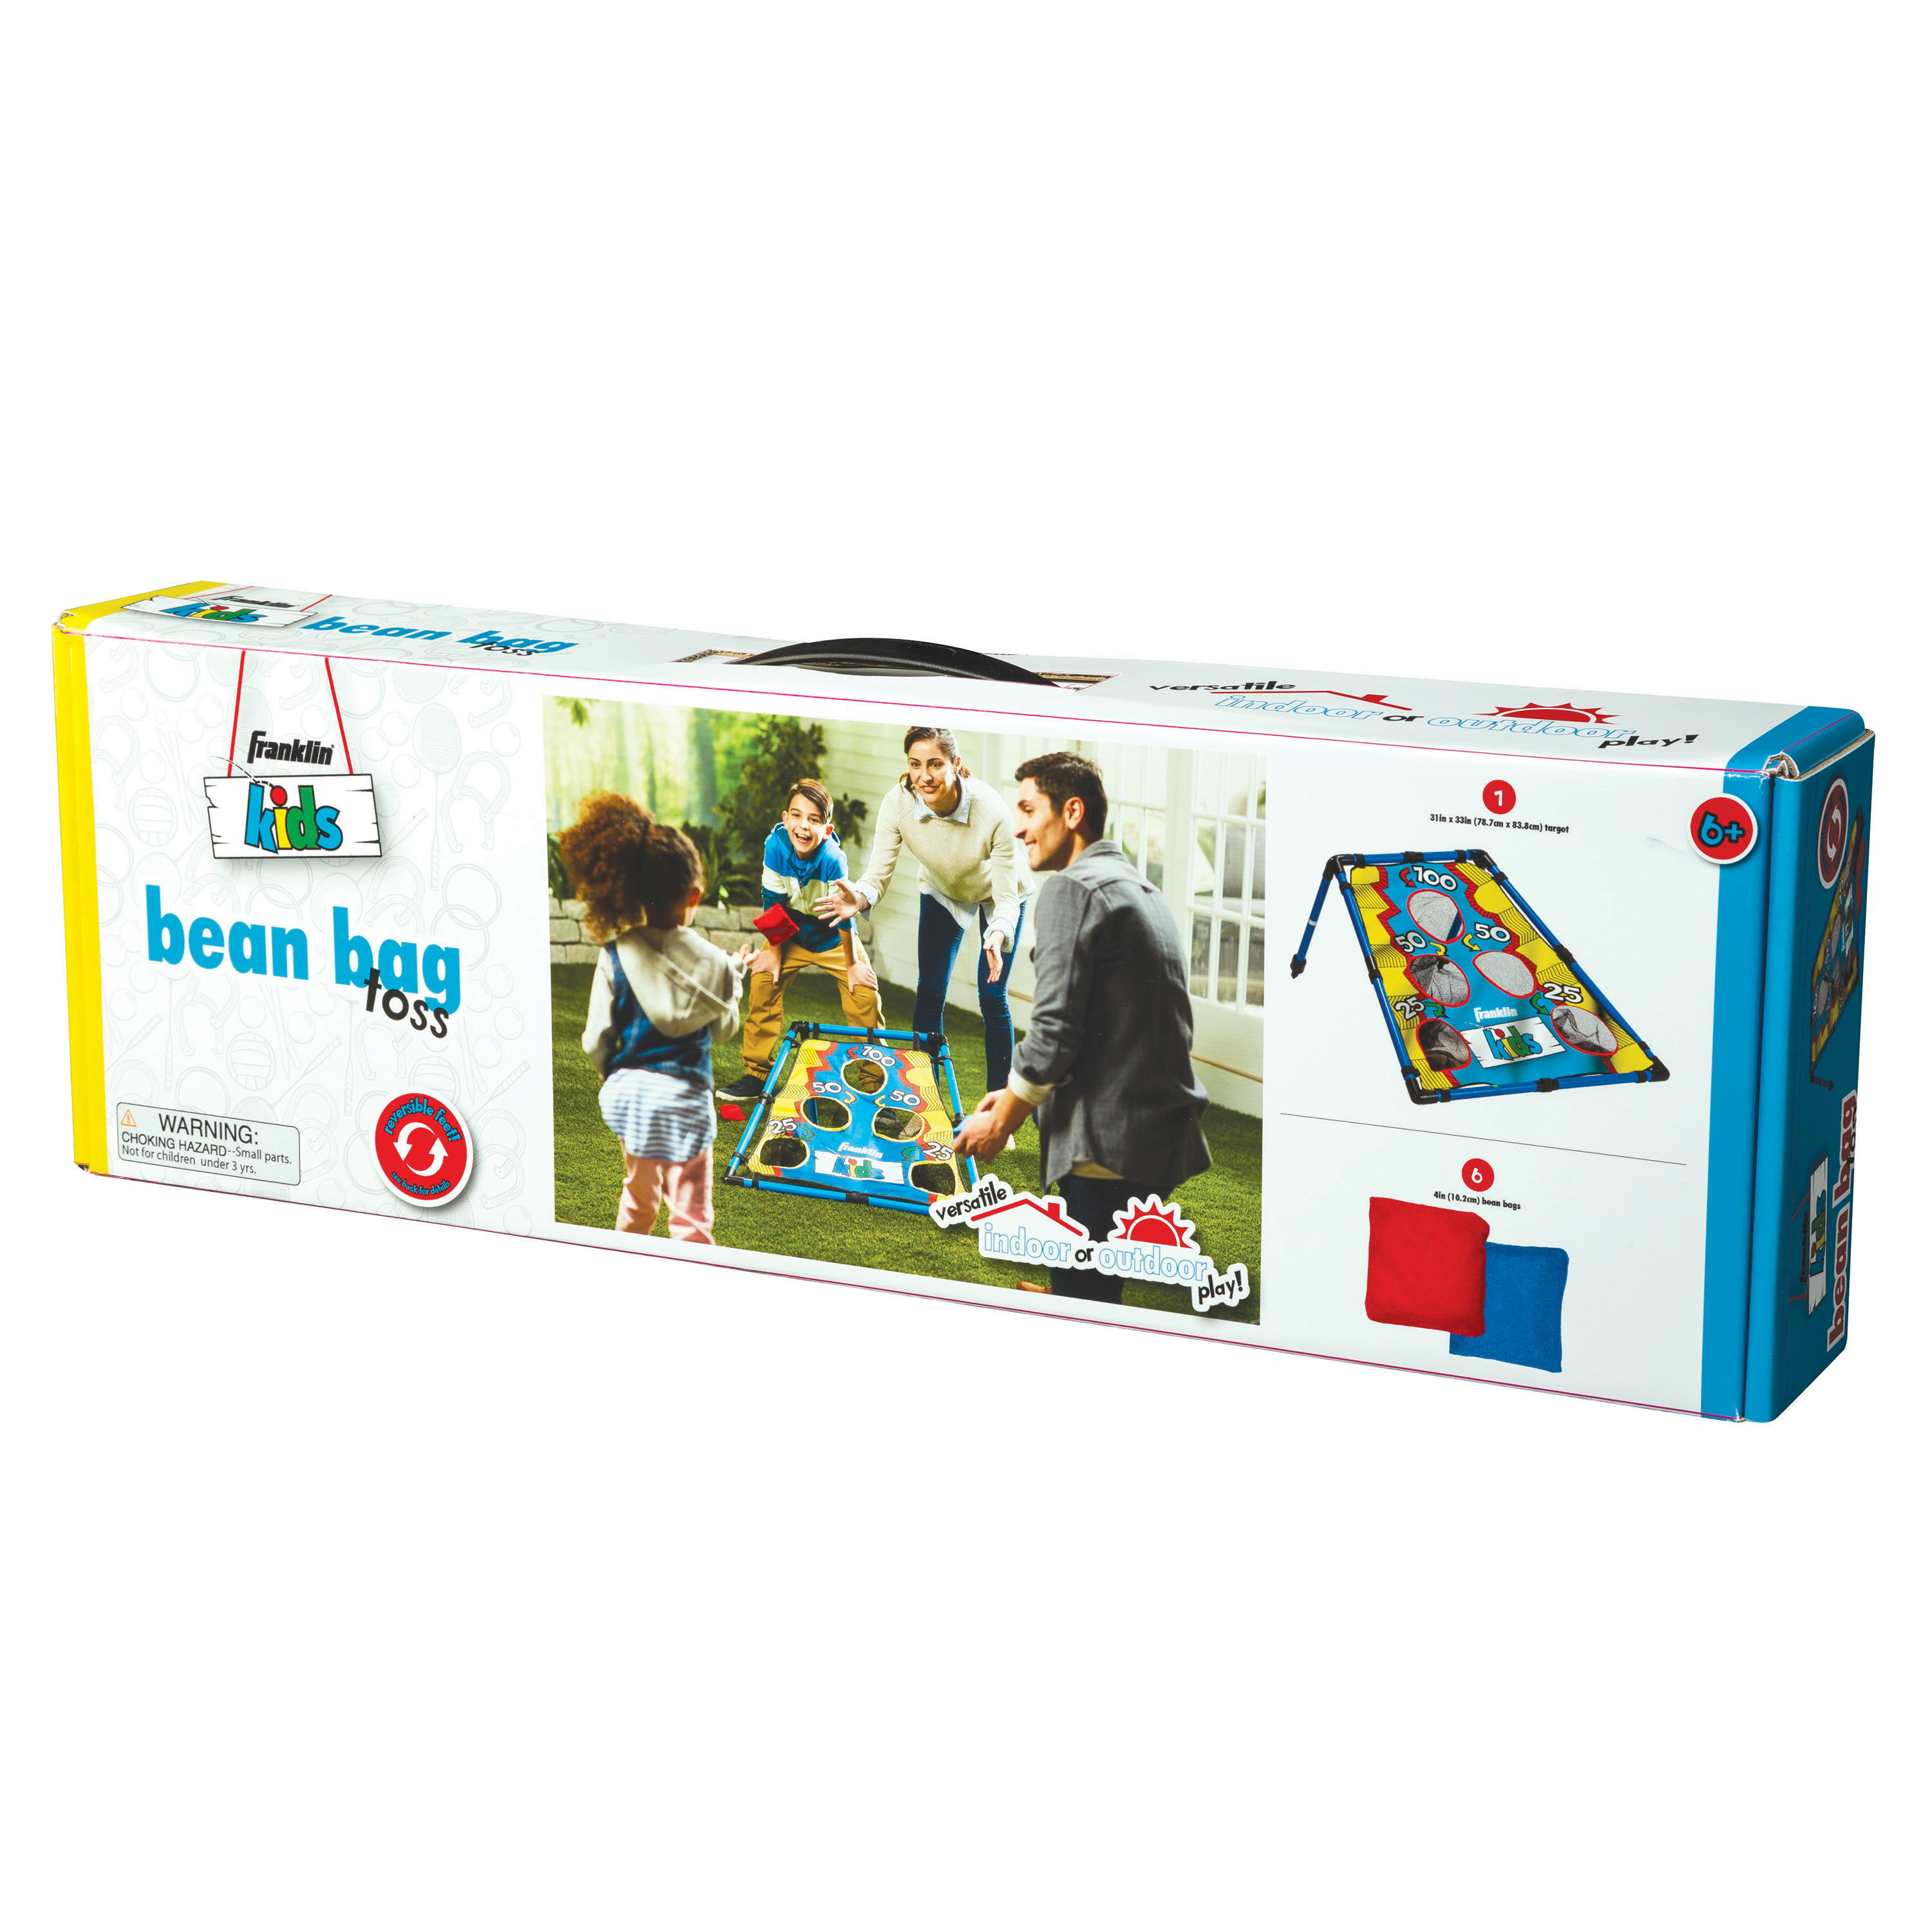 Franklin Sports Kids Bean Bag Toss - Great for Kids-Indoor Outdoor Use - Includes 31" x 33" Target and (6) 4" Bean Bags - image 6 of 7